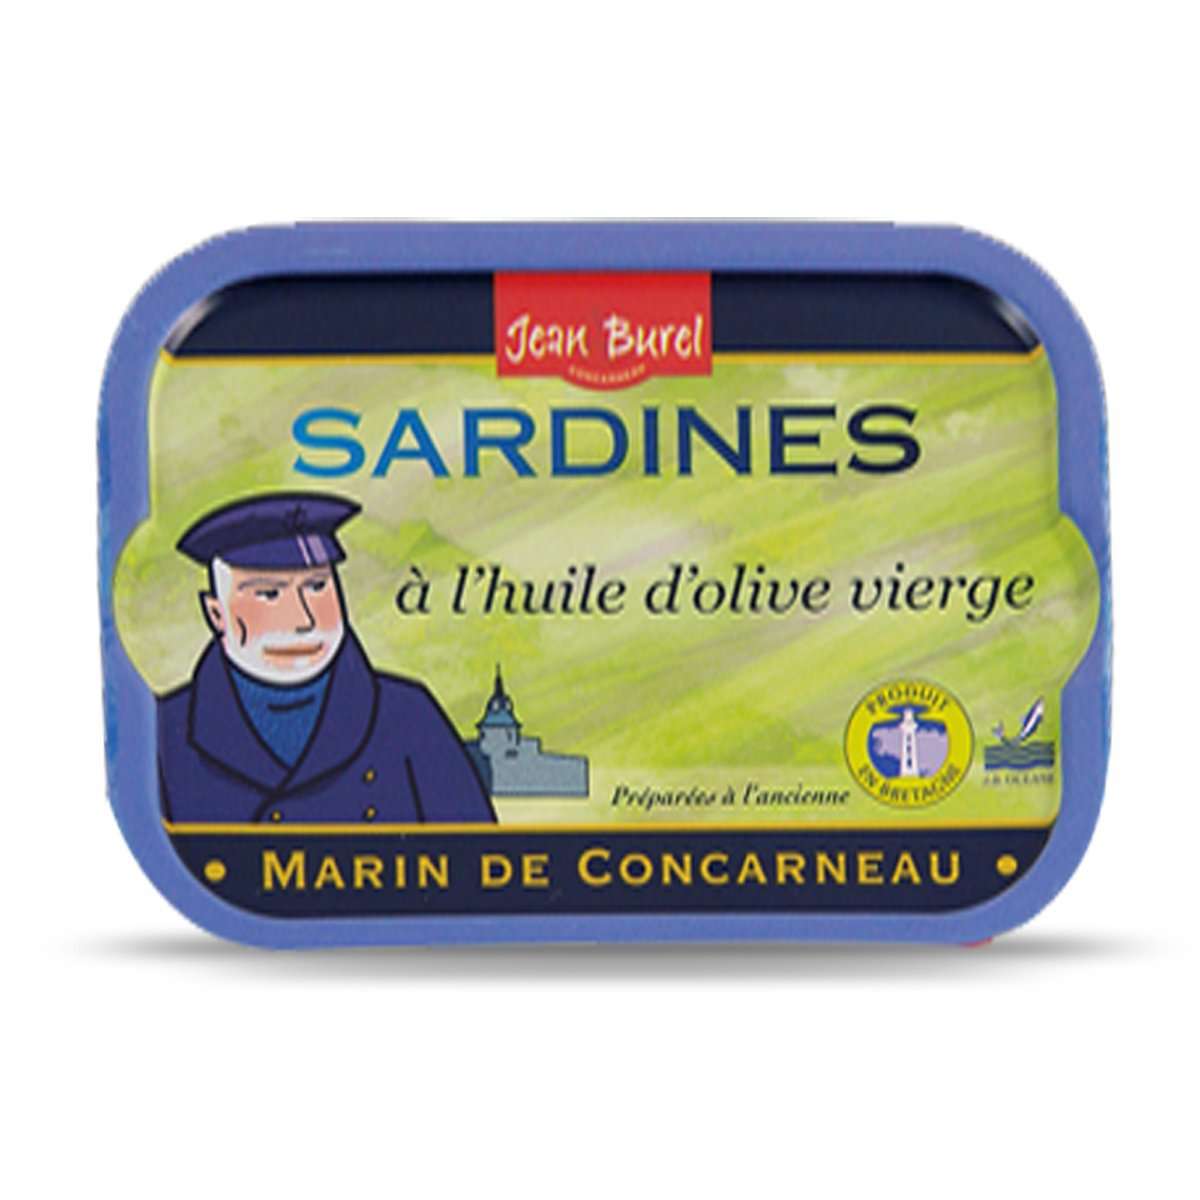 https://cdn.shopify.com/s/files/1/0253/0564/5110/products/Sardines_Huile_d_Olive_Vierge_extra_1200x1200.jpg?v=1588843535